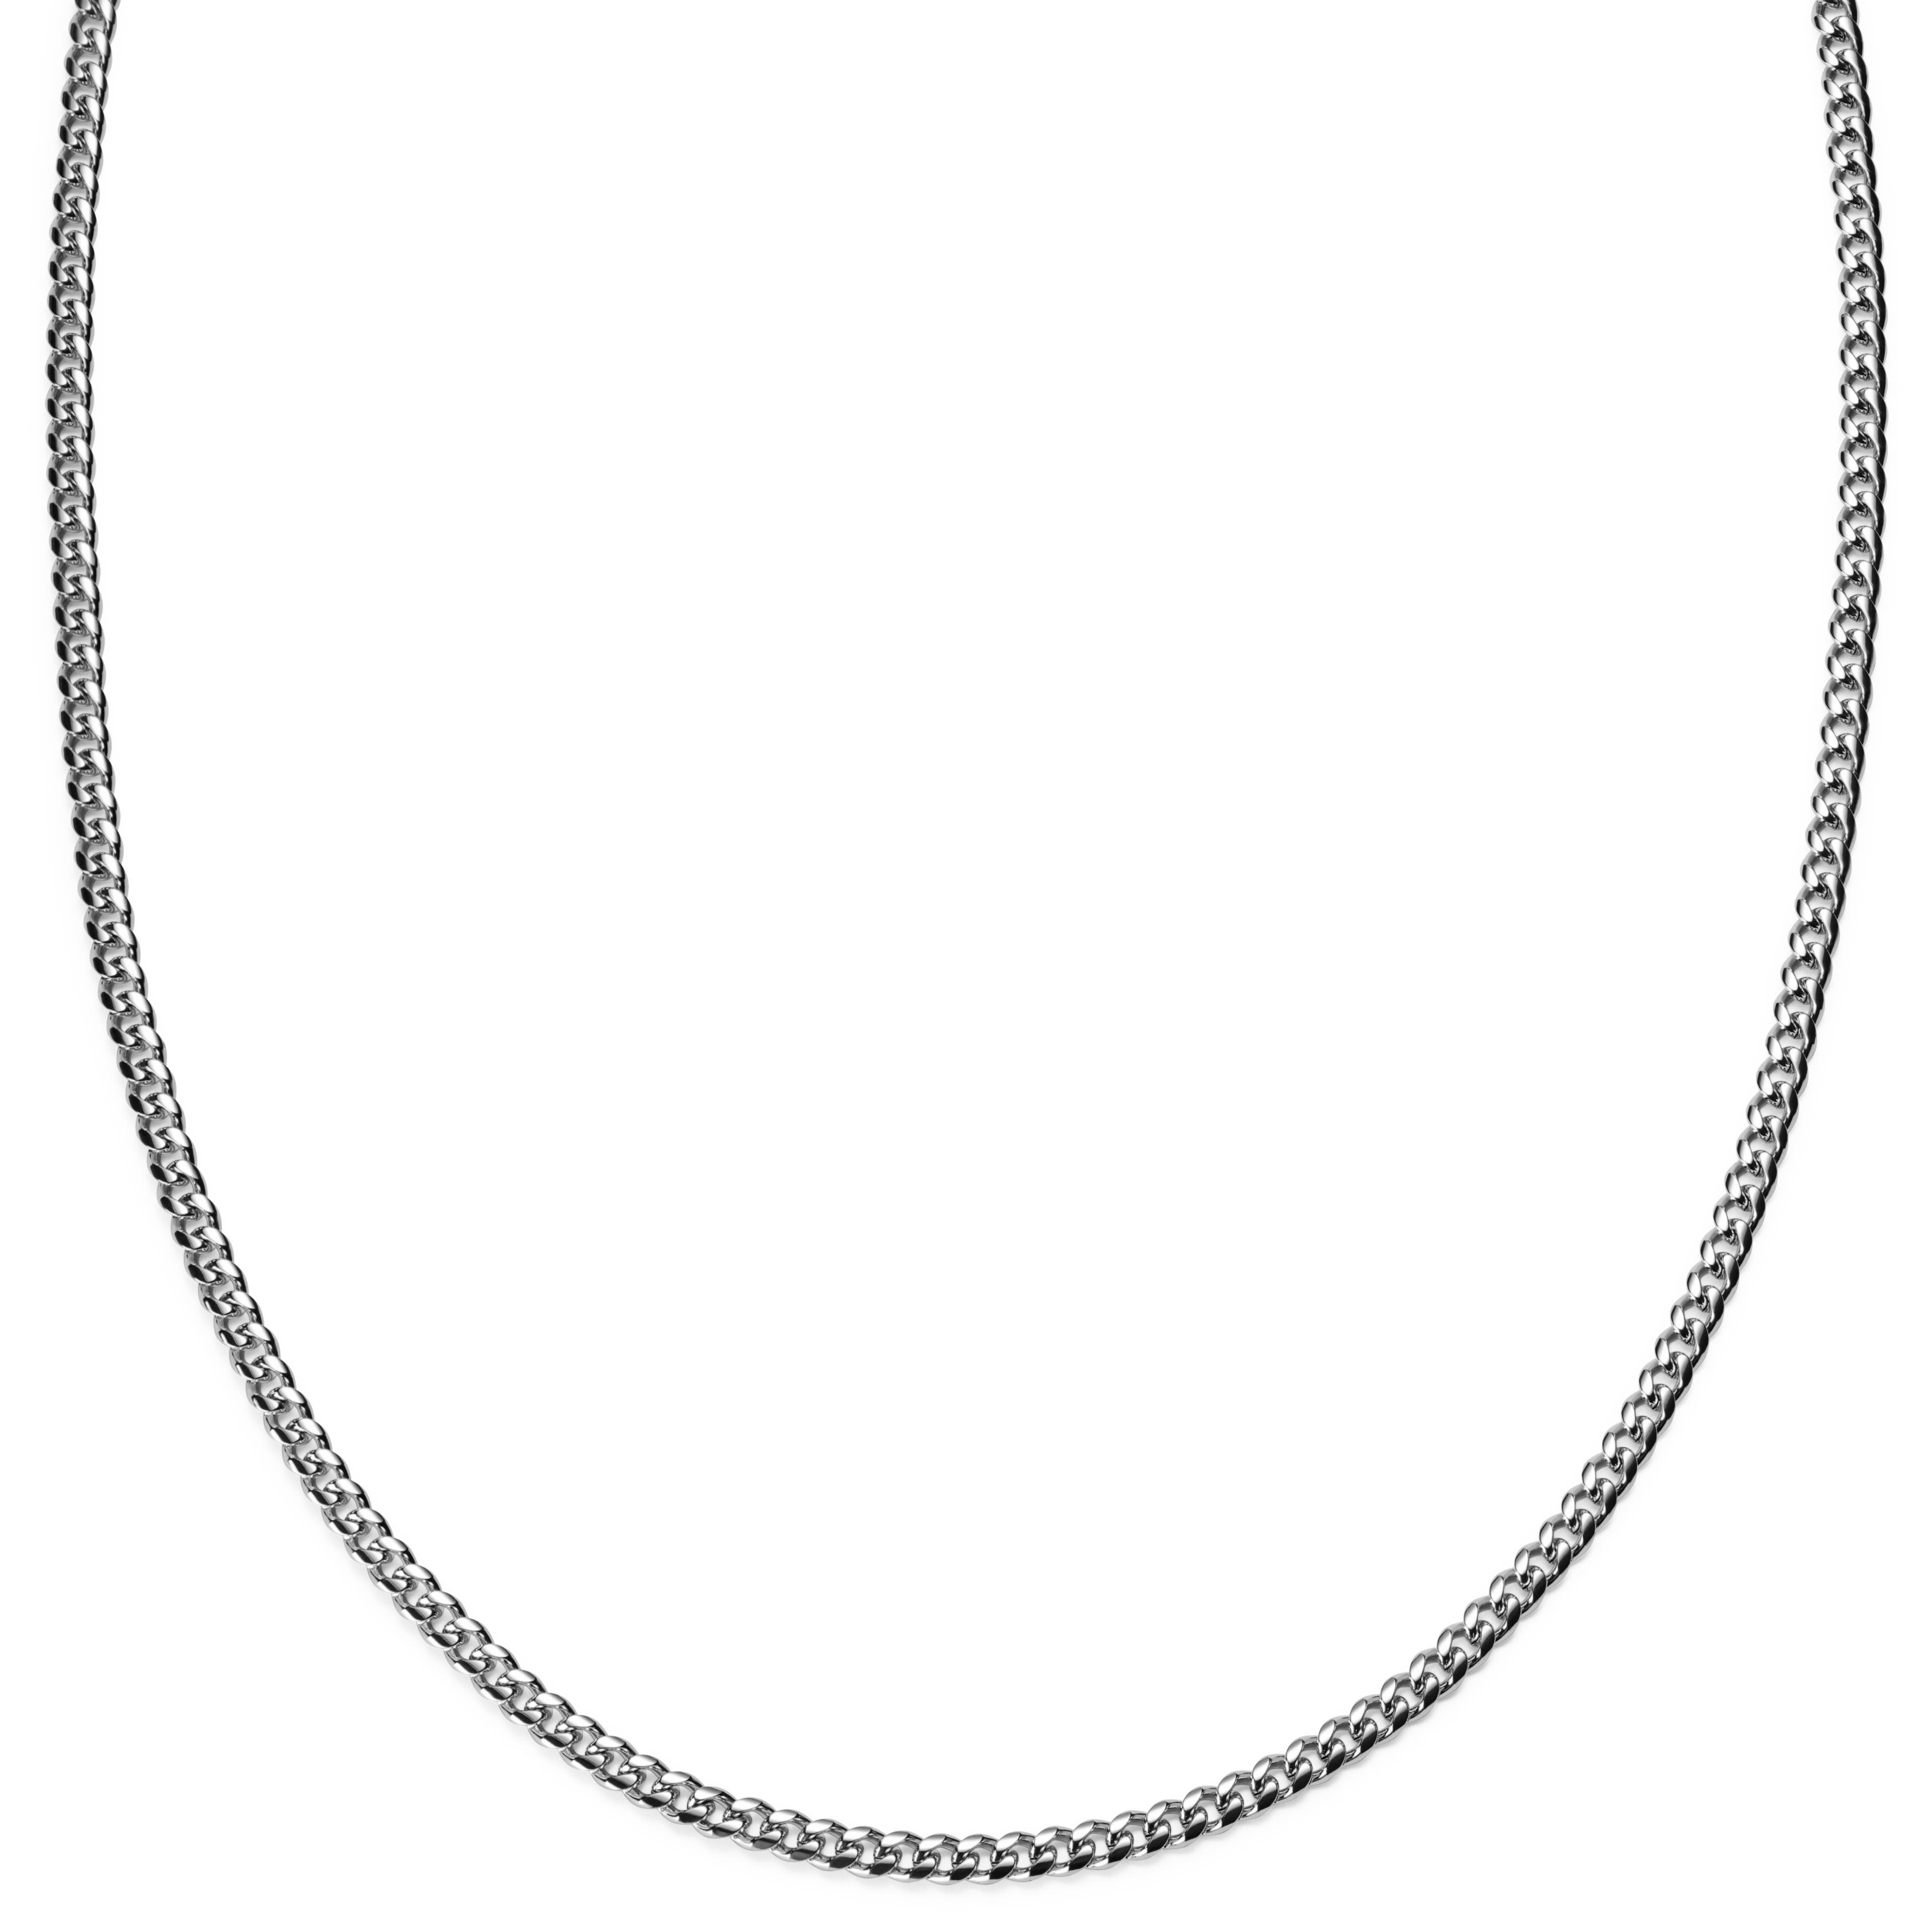 3 mm Silver-Tone Chain Necklace